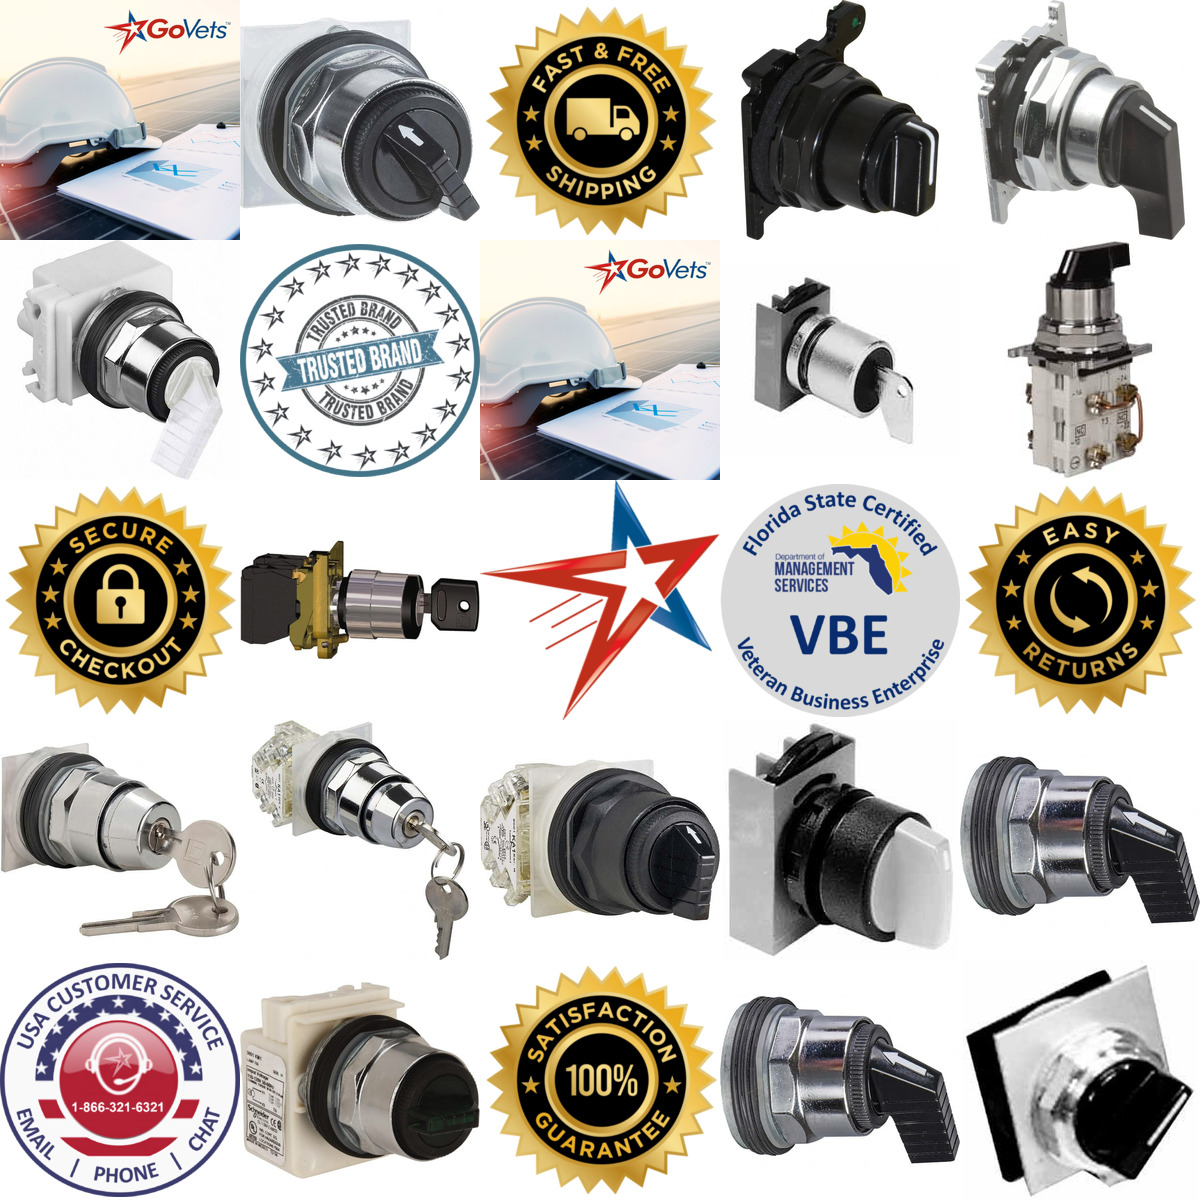 A selection of Selector Switches products on GoVets